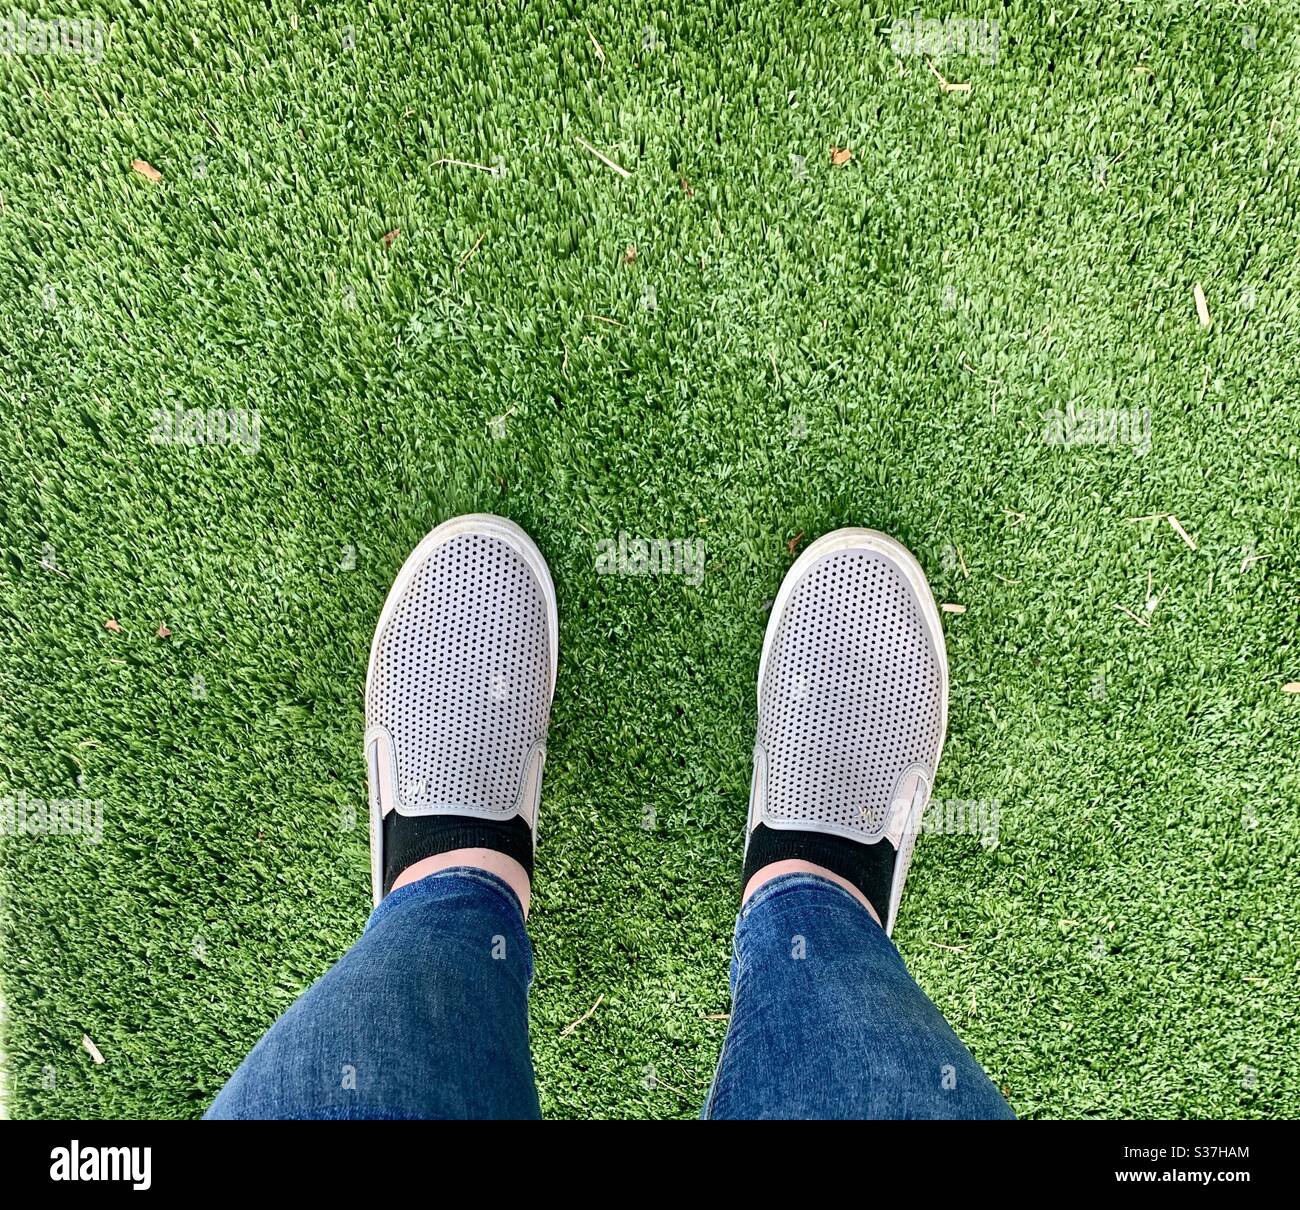 Standing in fake grass Stock Photo